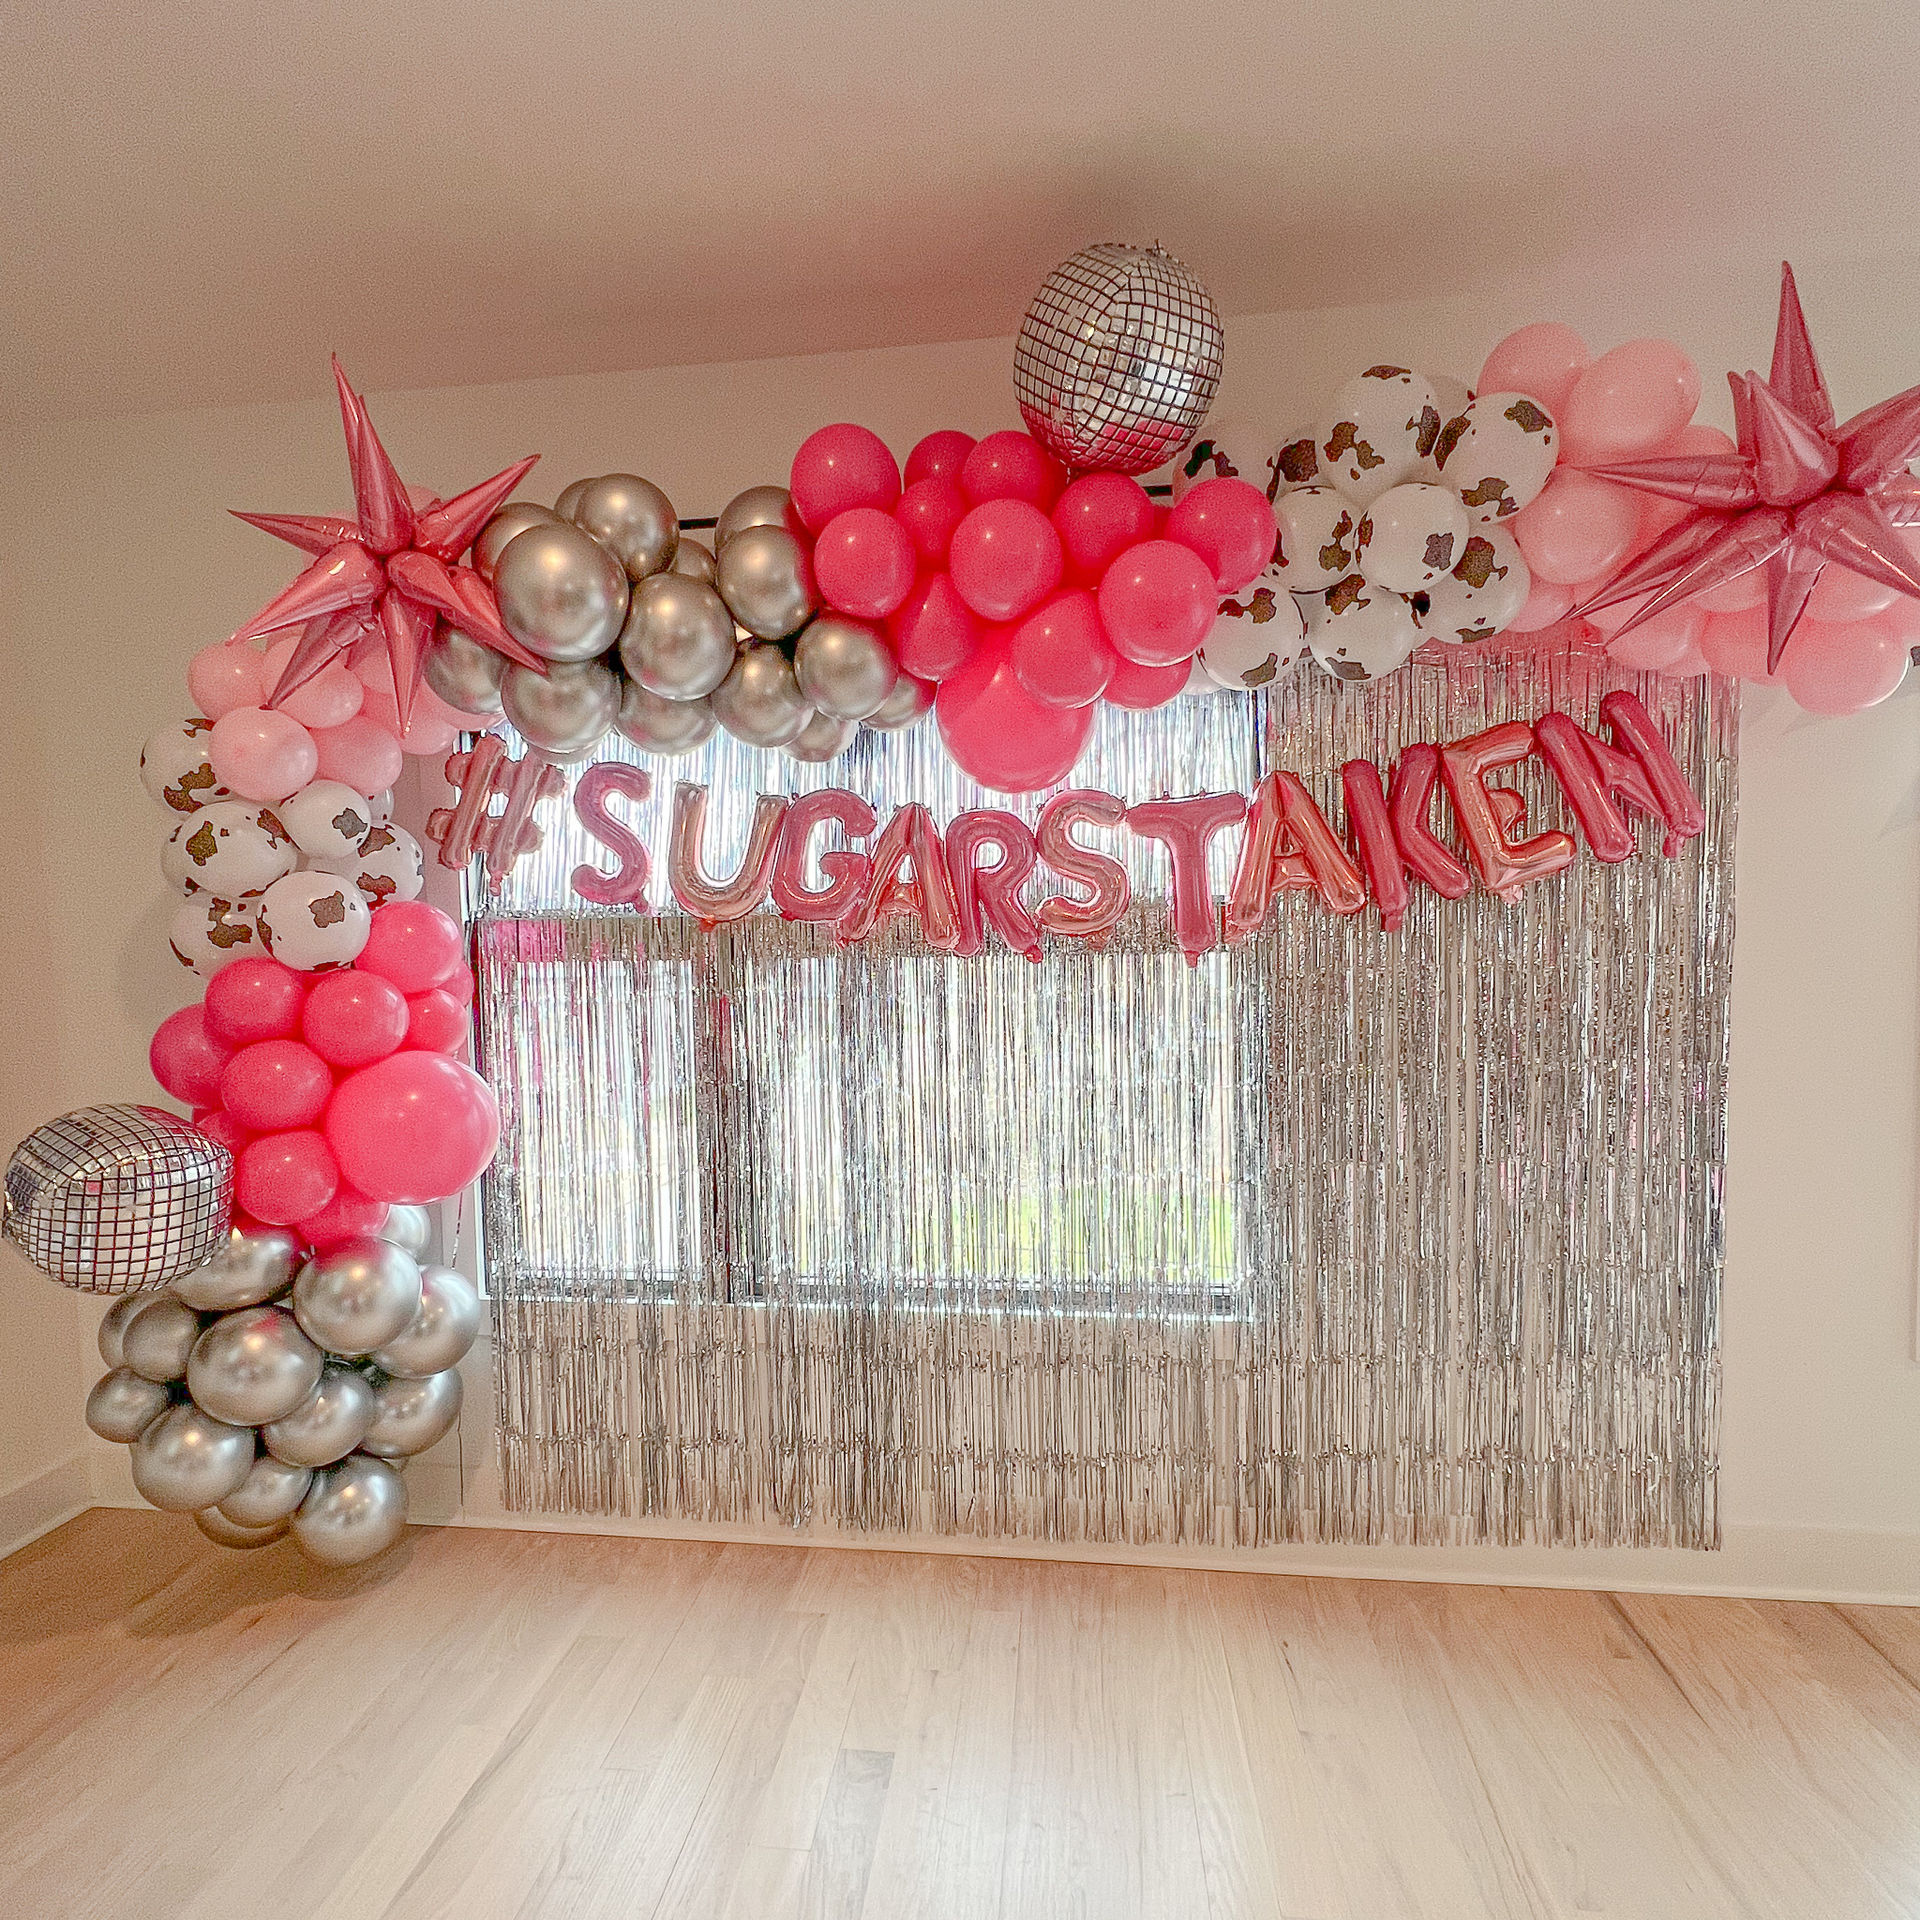 All-Inclusive Party Decoration Set-up at Your Hotel or House Rental with Photo Wall, Foil Balloons, Custom Banner, Garlands and More image 2